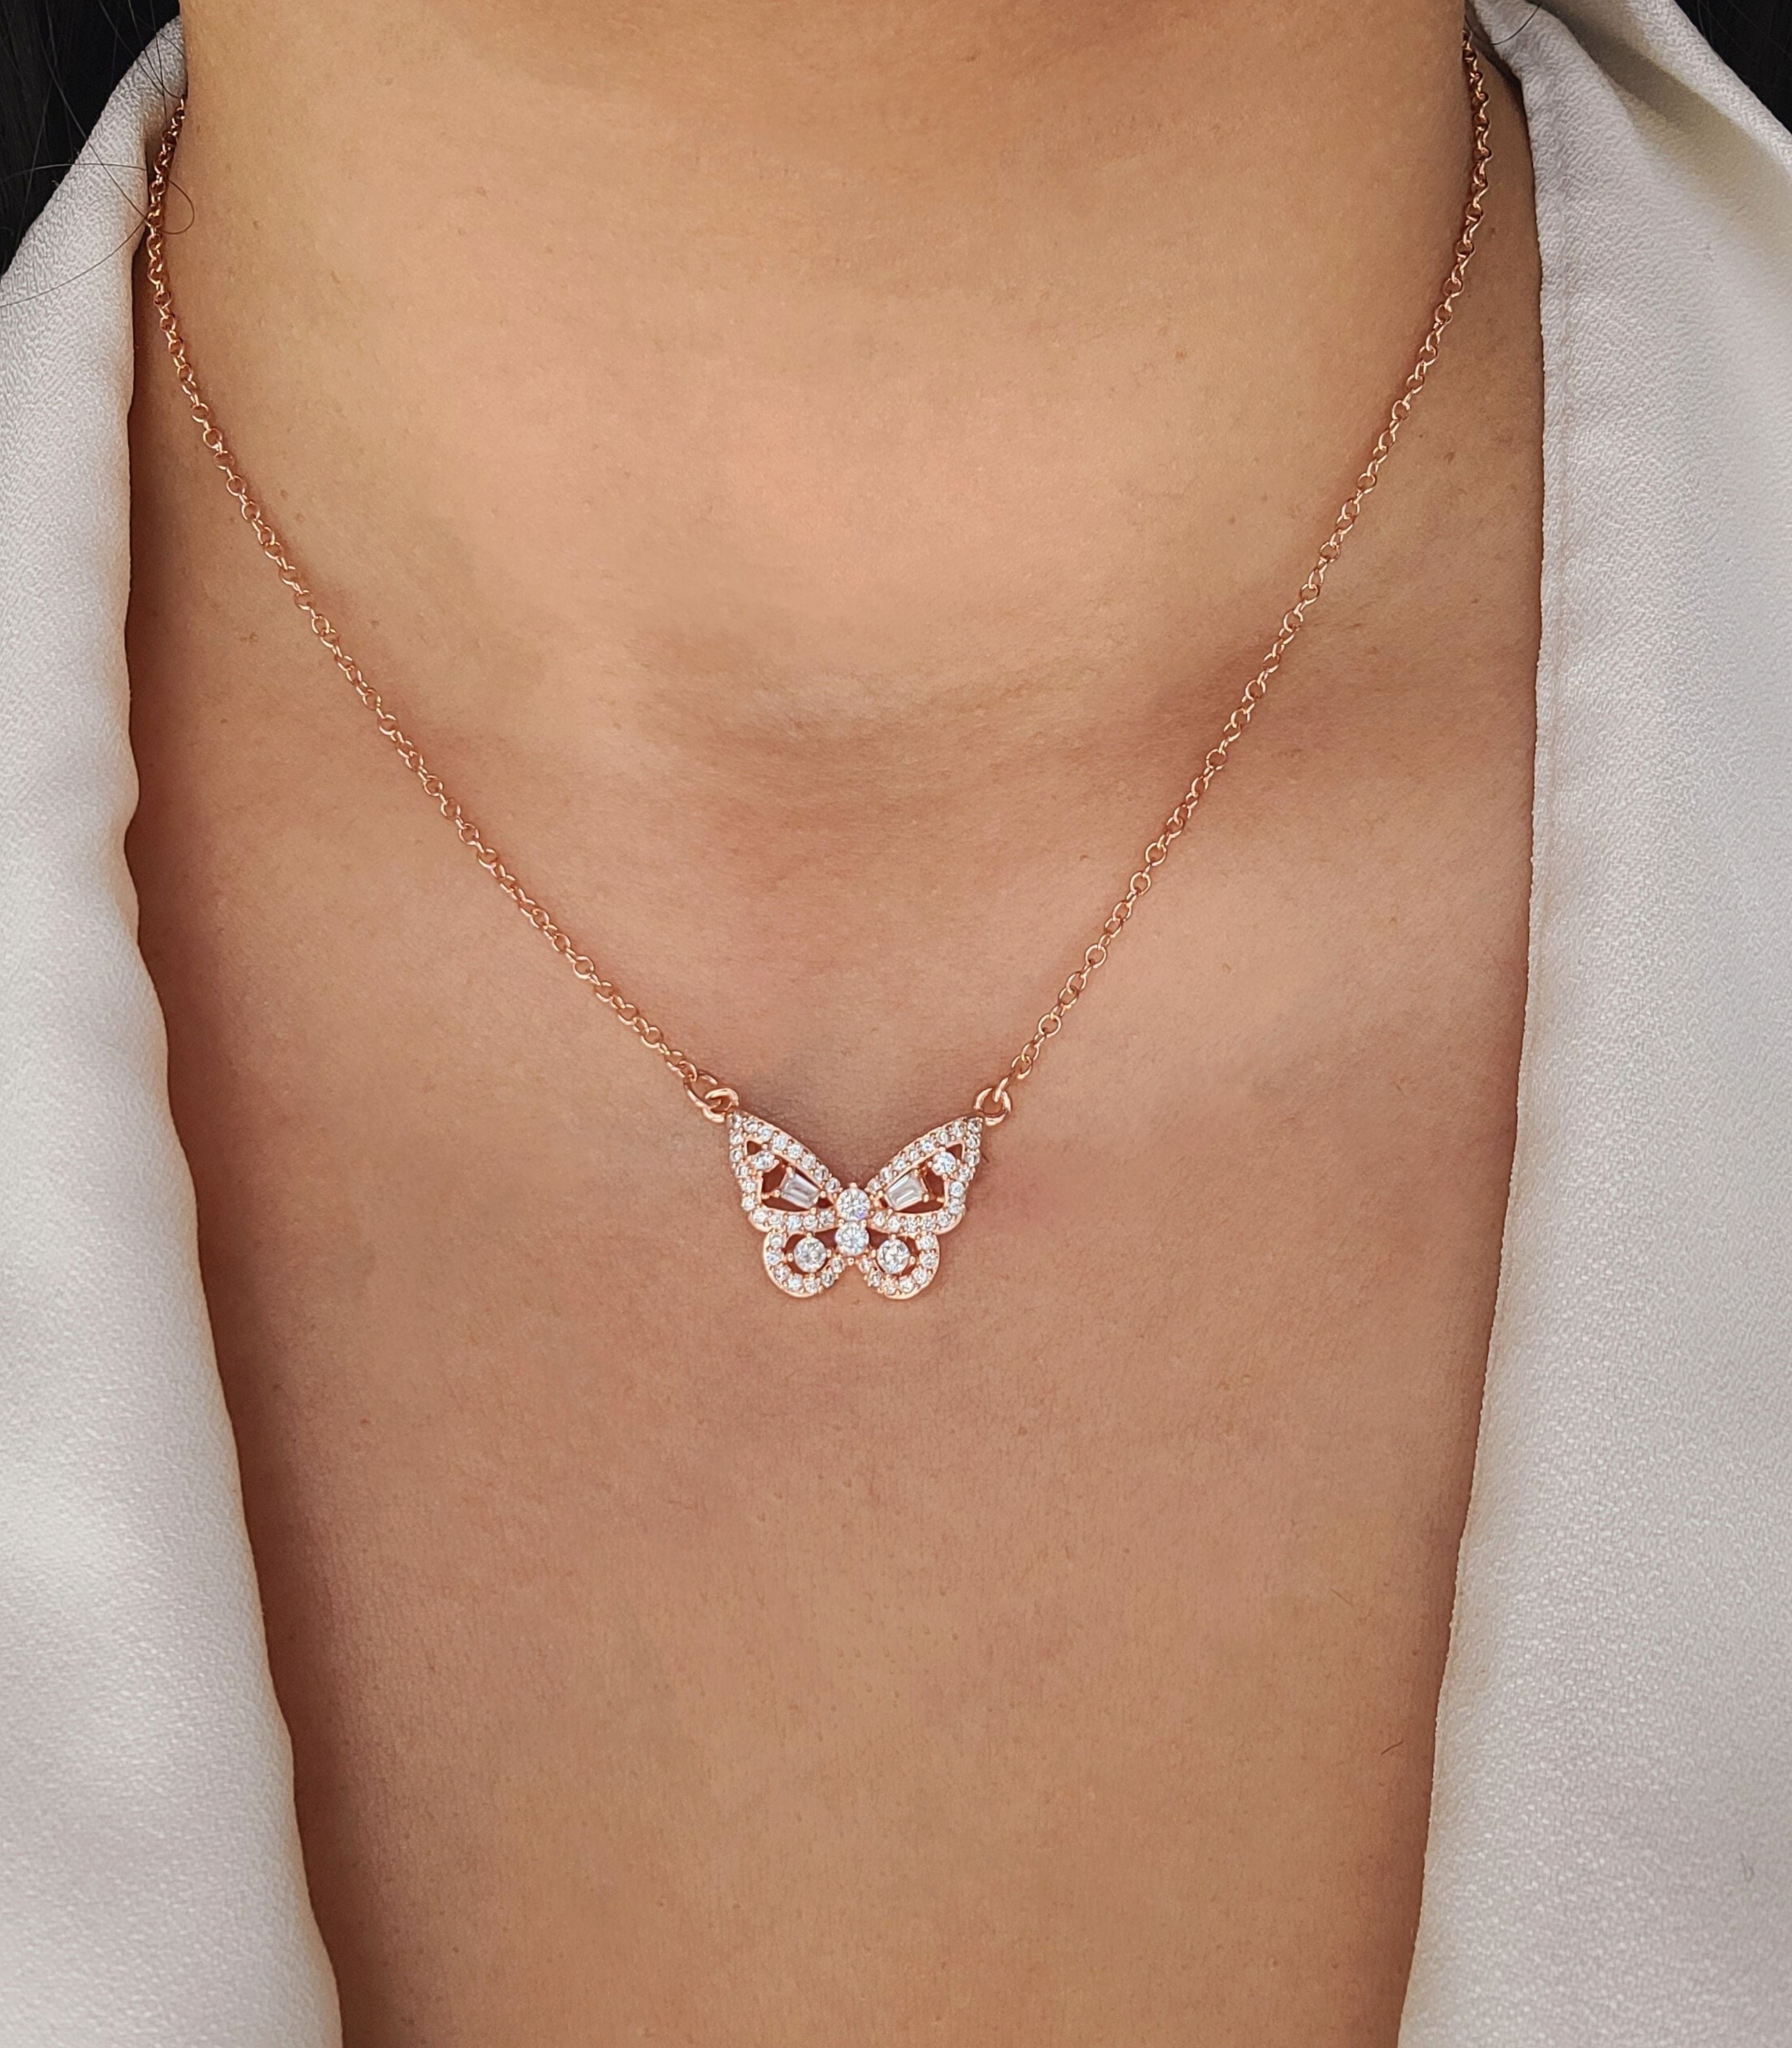 Rose gold butterfly necklace